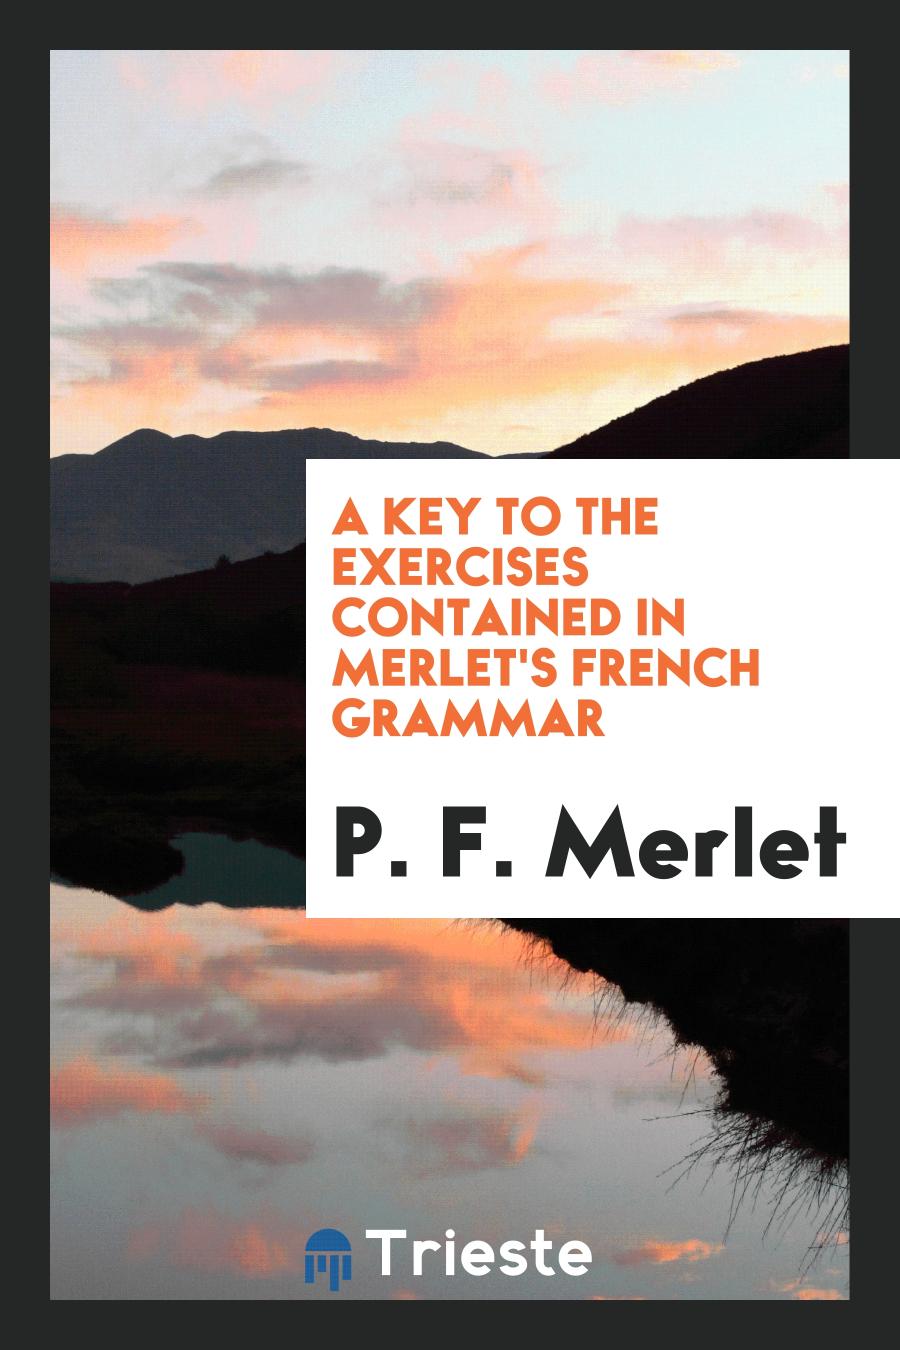 A Key to the Exercises Contained in Merlet's French Grammar